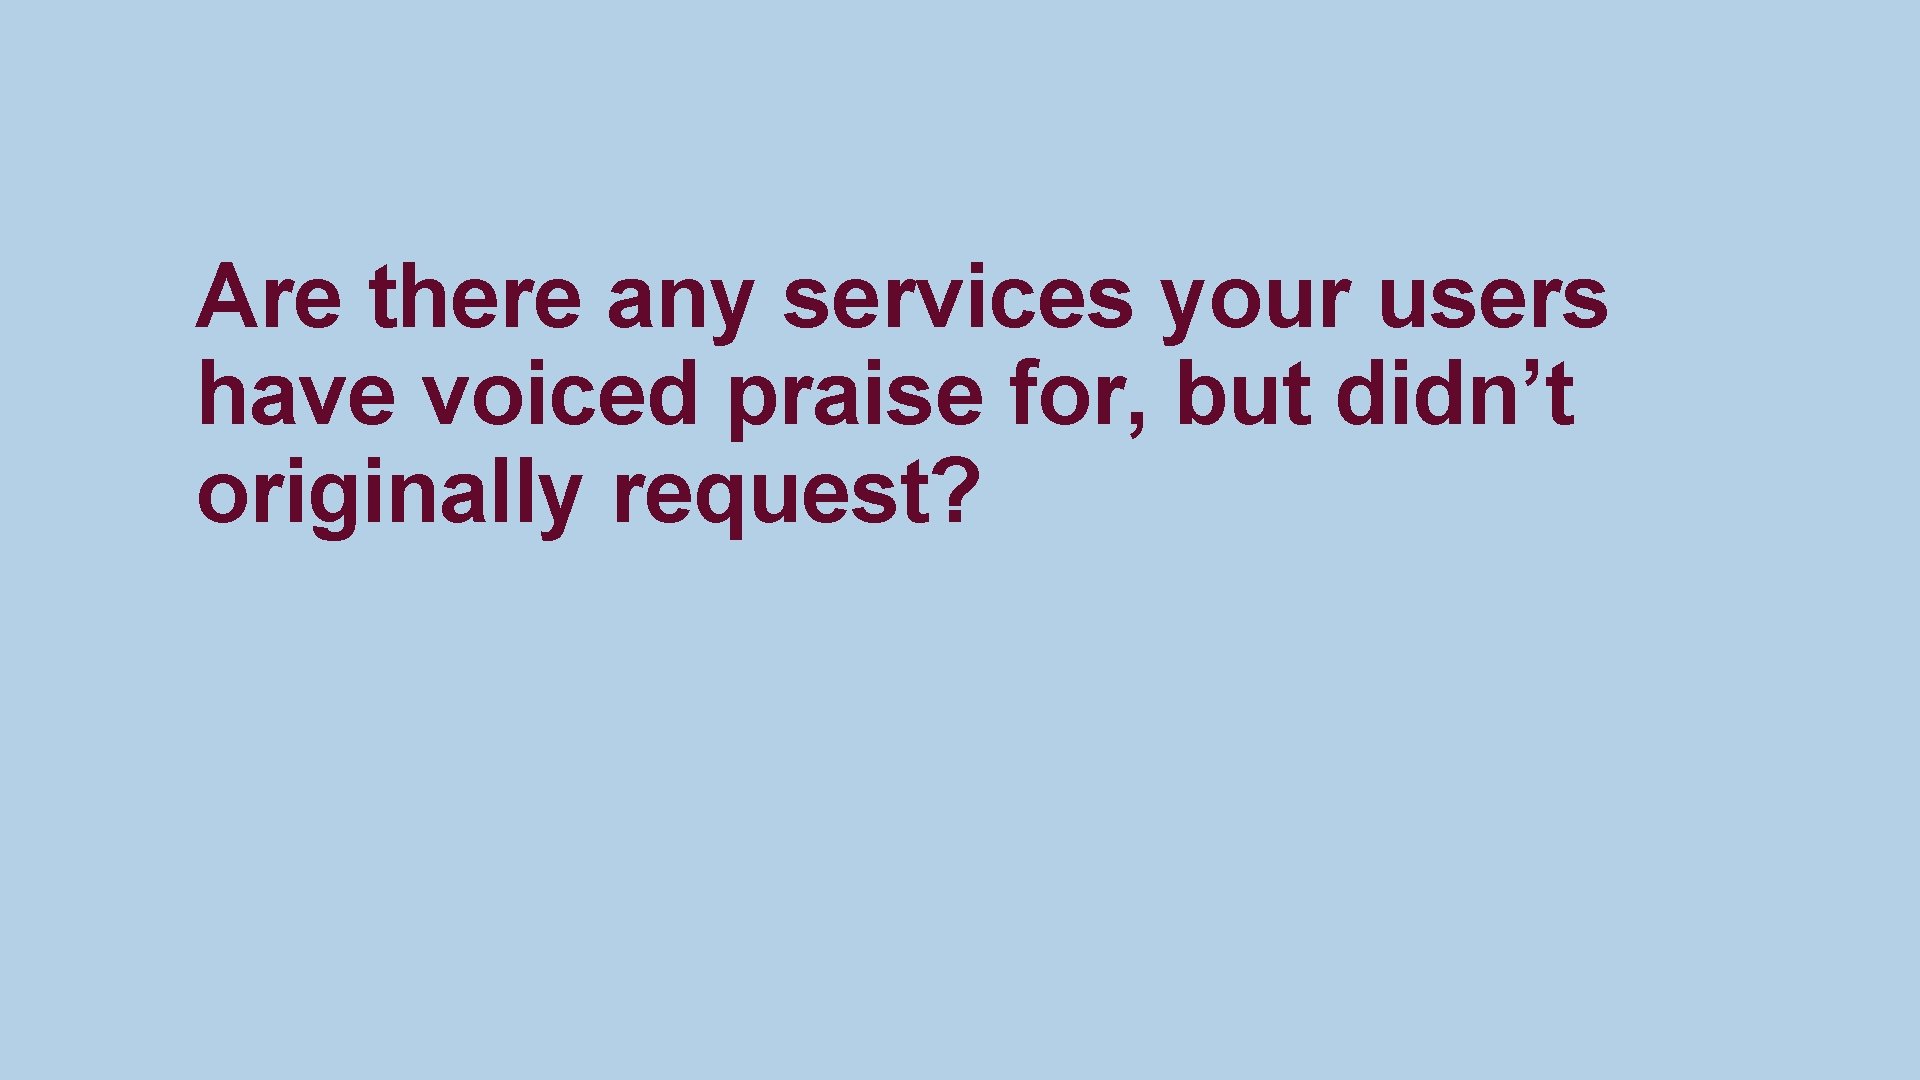 Are there any services your users have voiced praise for, but didn’t originally request?